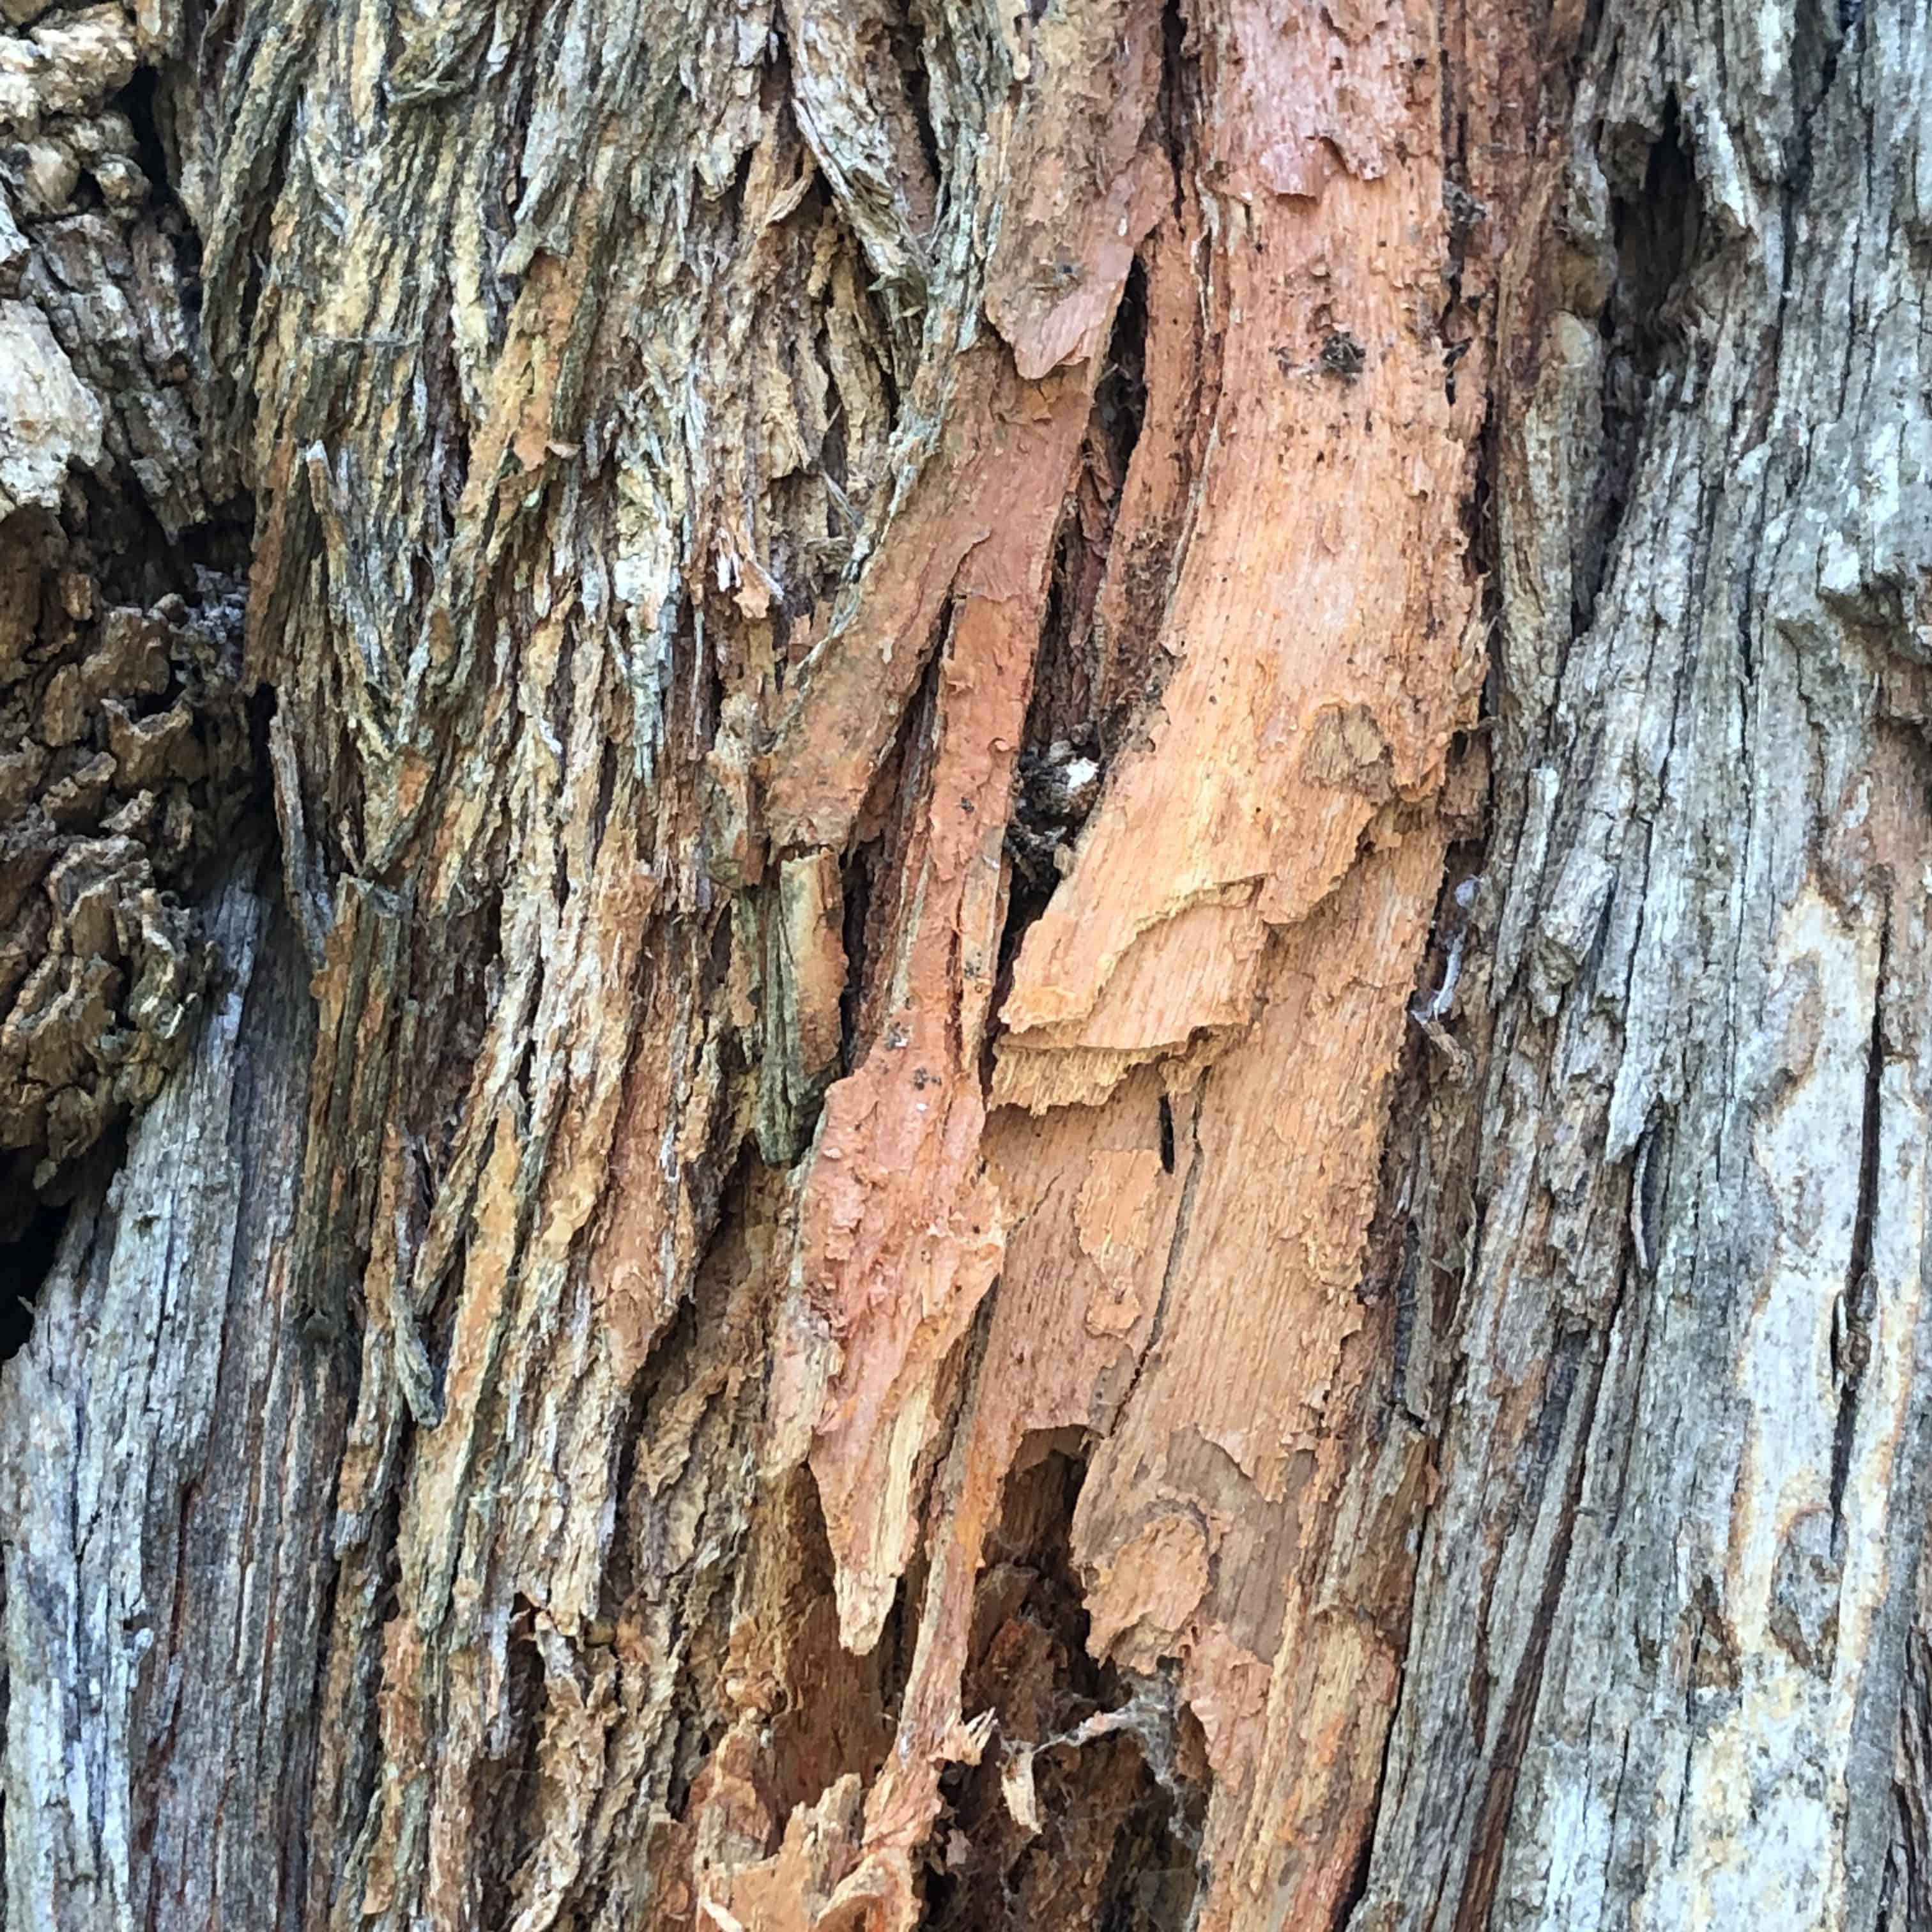 Outer bark and inner orange colored wood of Maclura pomifera